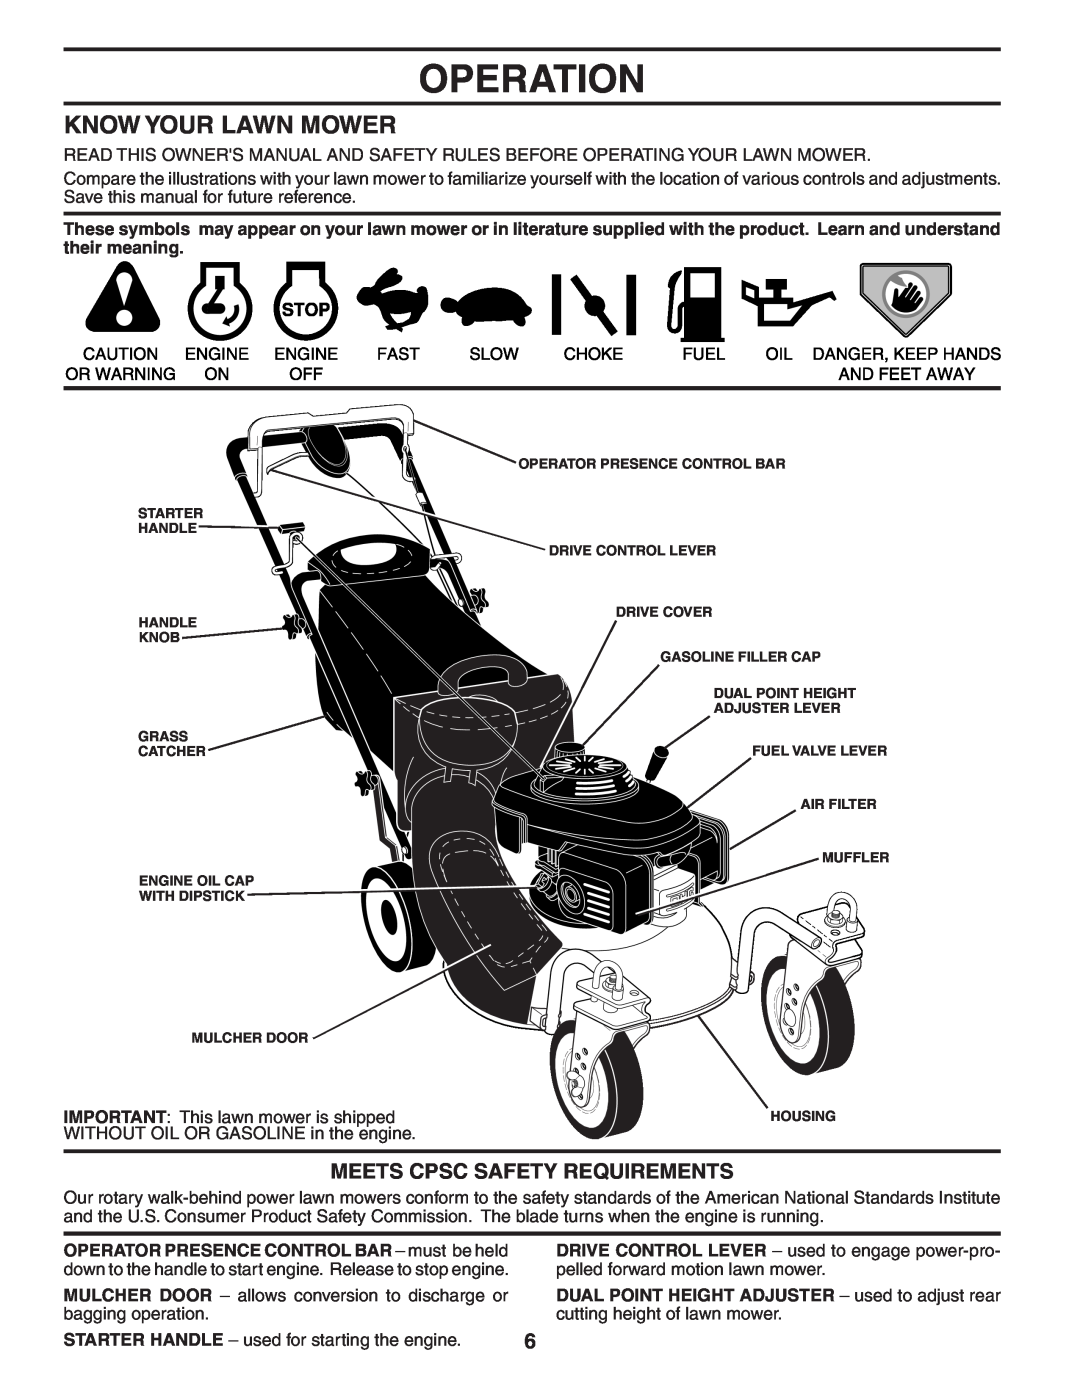 Husqvarna 917.374781 (65RSW21HVB) owner manual Operation, Know Your Lawn Mower, Meets Cpsc Safety Requirements 